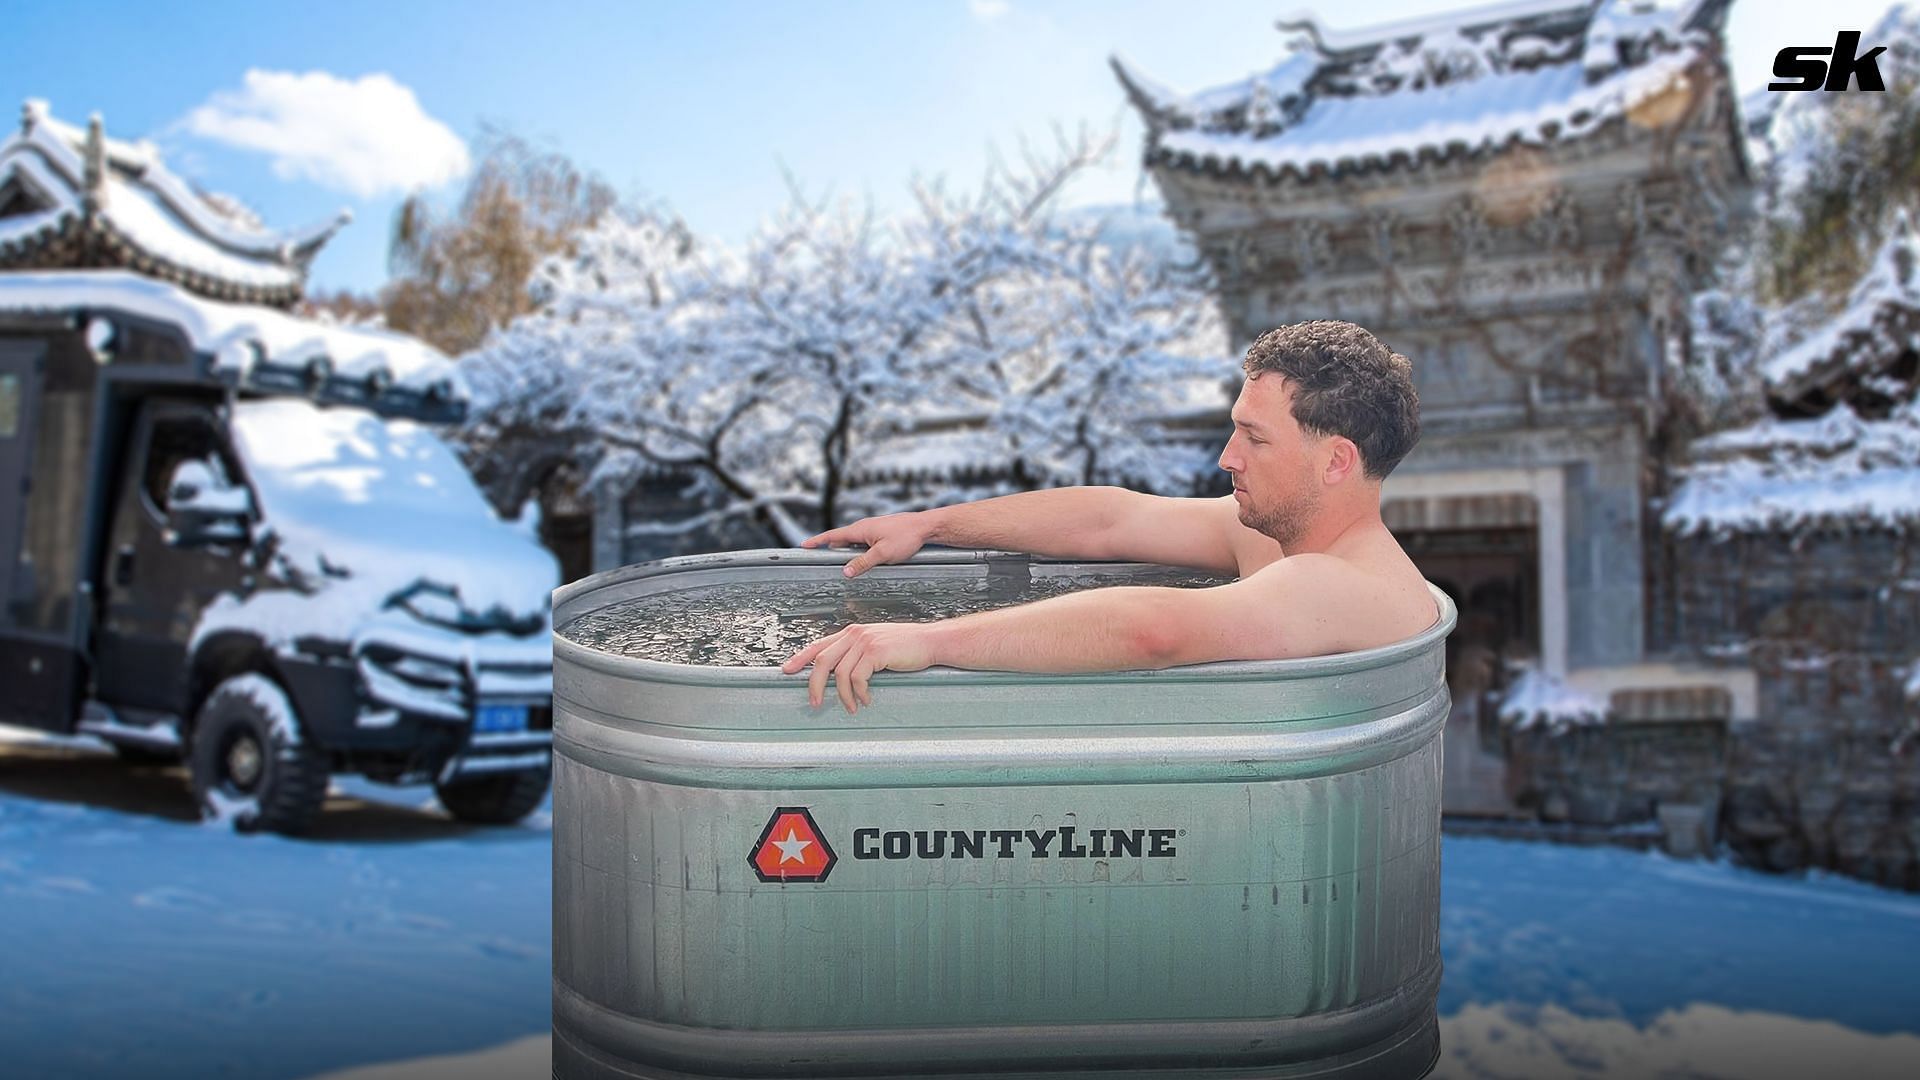 Astros star Alex Bregman makes a splash with cold therapy dip, fans leave jokes on thin ice